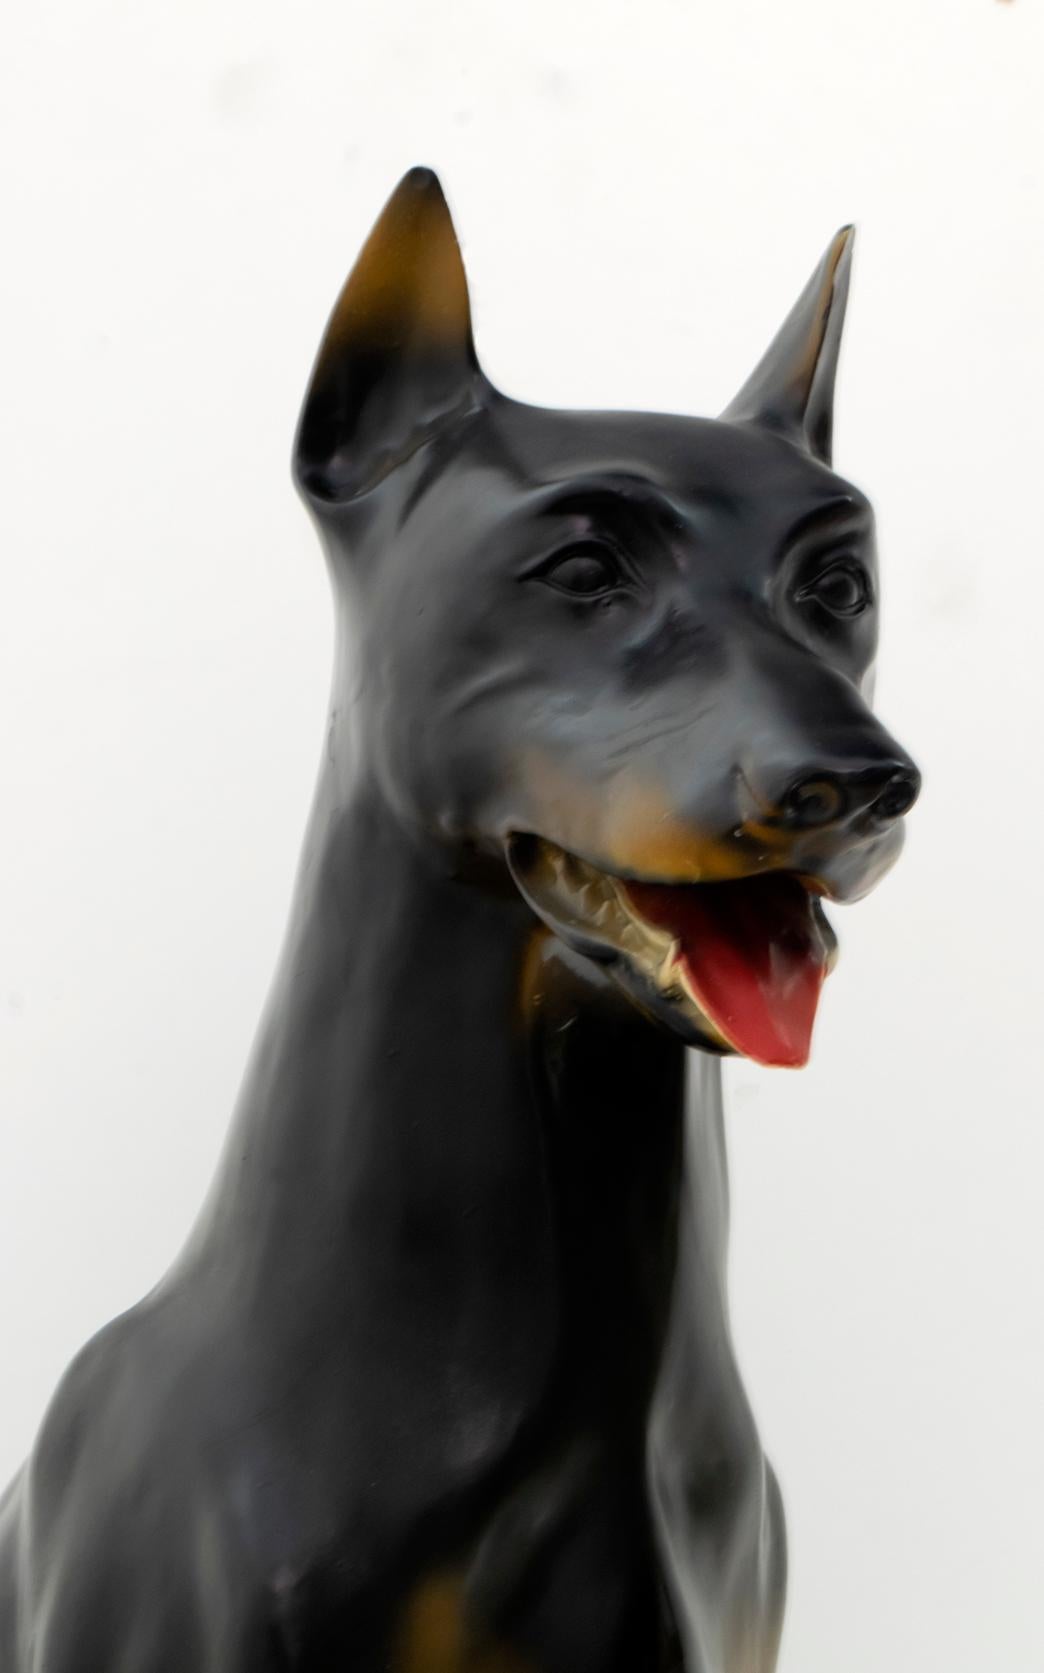 This life-size dog was made of resin, probably used as an advertising dog for dog food, an original piece of furniture.